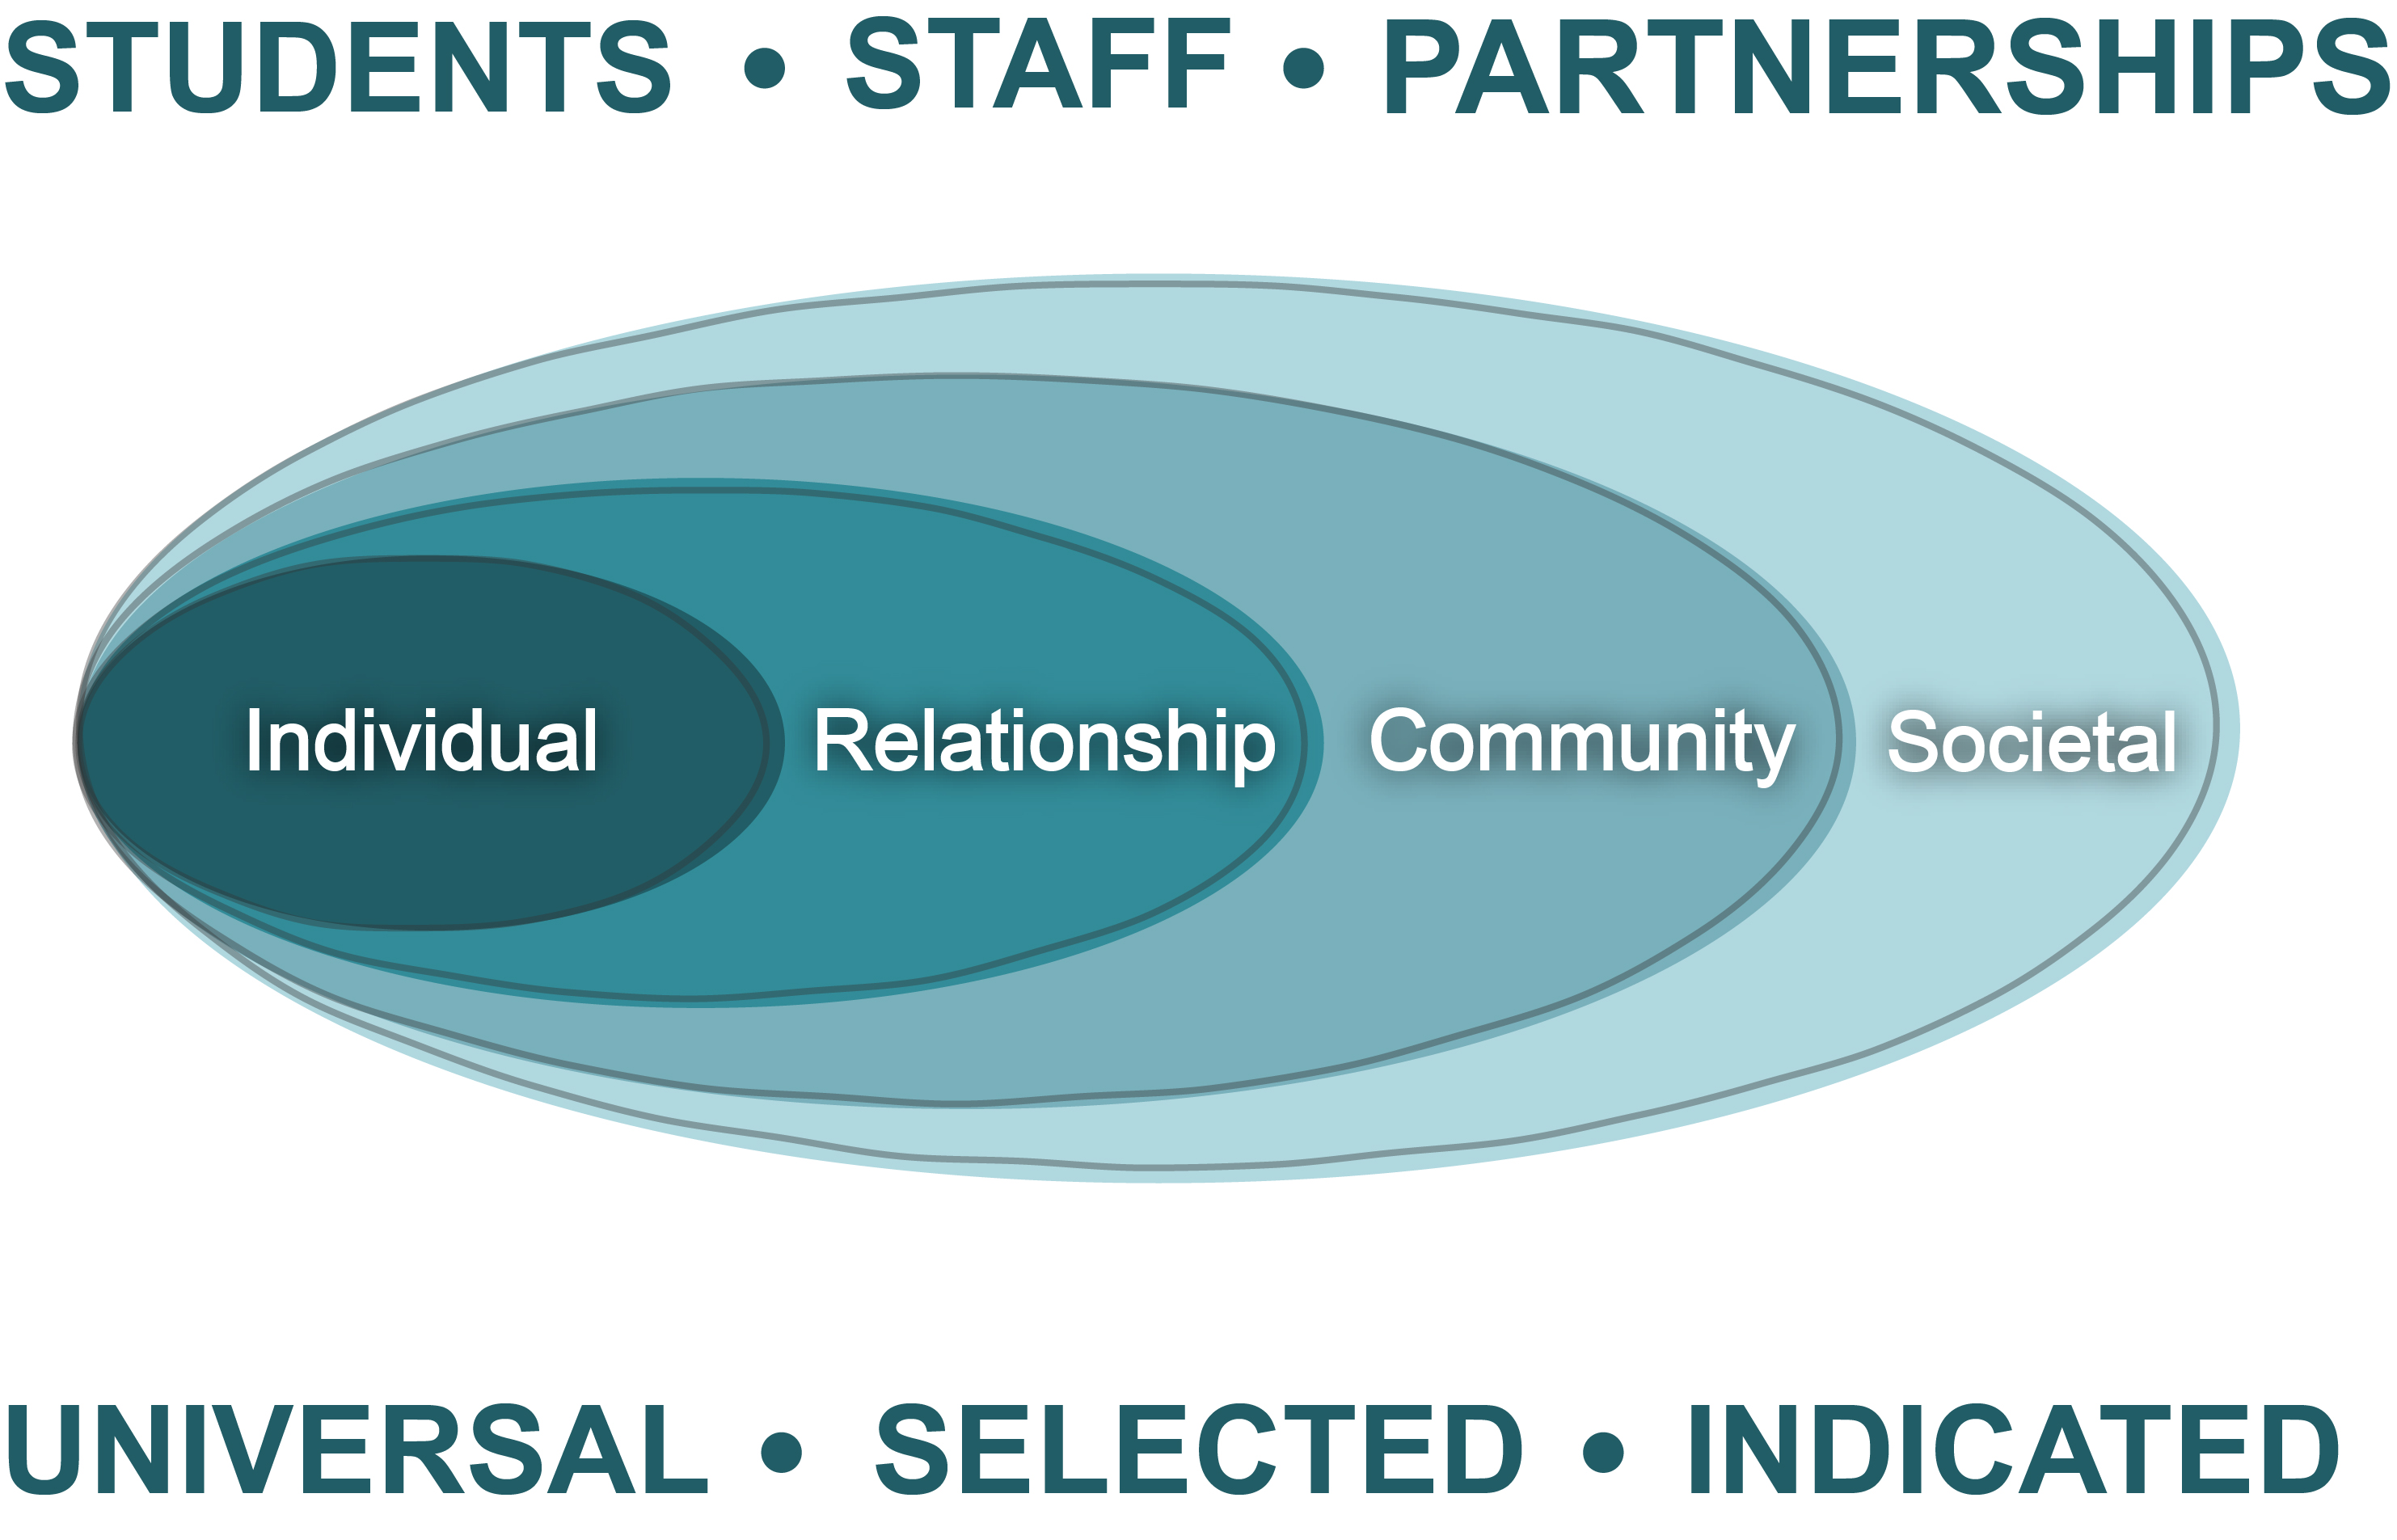 Image of the Socioecological Model. Above the Model are the words, "Students. Staff. Partnerships." Below the model are the words, "Universal. Selected. Indicated." The model shows four ovals ranging from dark blue to light blue. The darkest blue oval is inside the next oval and so on. Words inside each oval from smallest to largest read, "Individual. Relationship. Community. Societal."